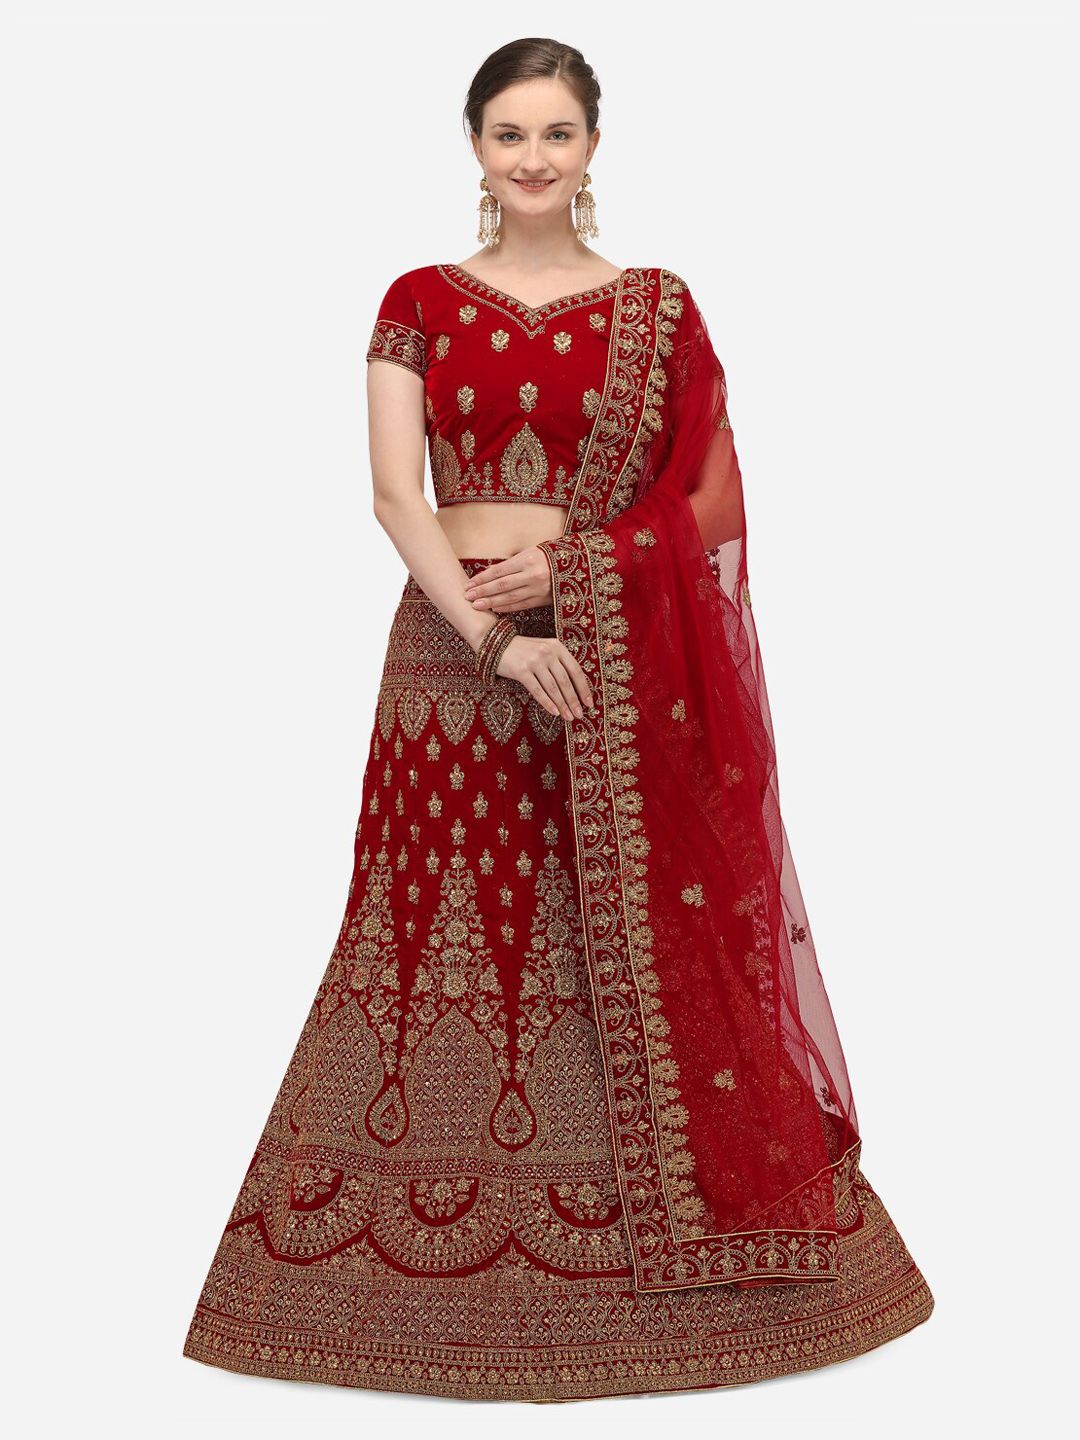 Netram Maroon & Gold-Toned Embroidered Semi-Stitched Lehenga & Unstitched Blouse with Dupatta Price in India